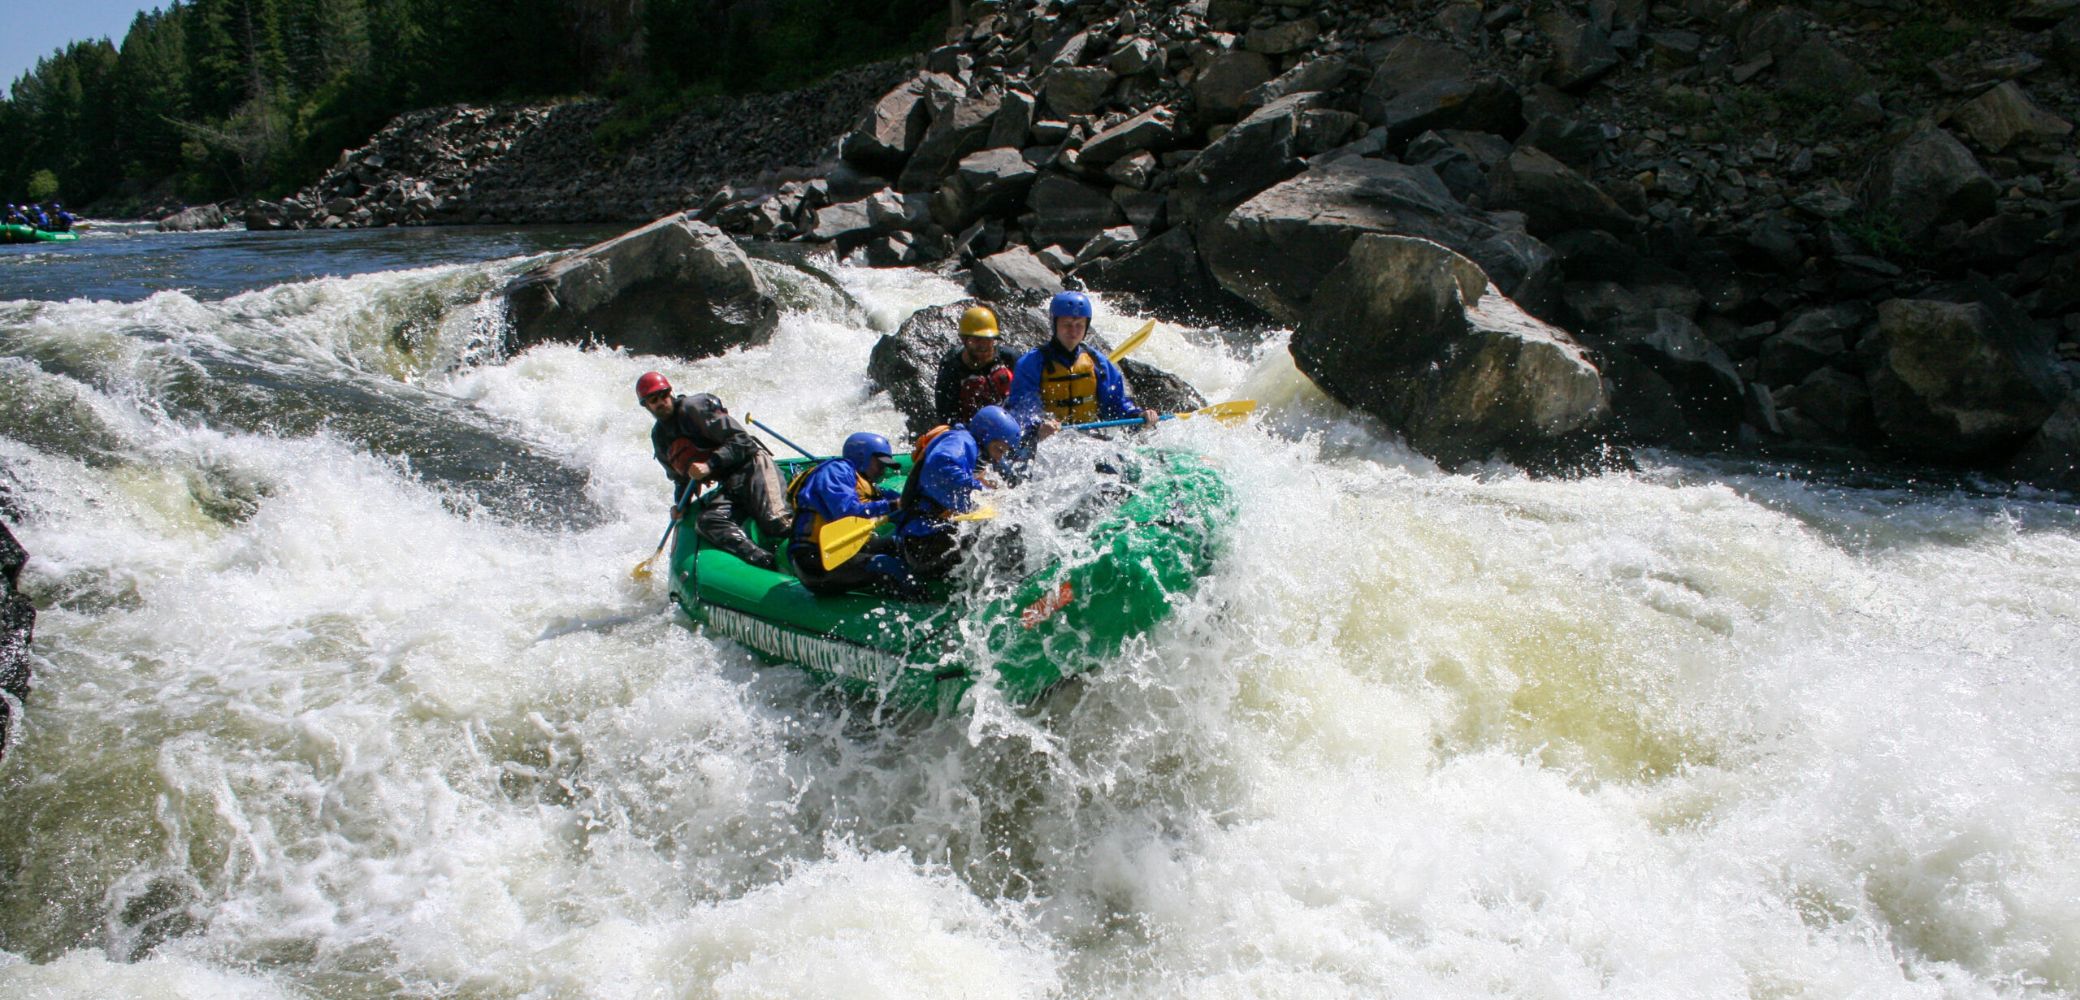 Navigating Apple Sauce Rapids on a Gore Canyon whitewater rafting tour